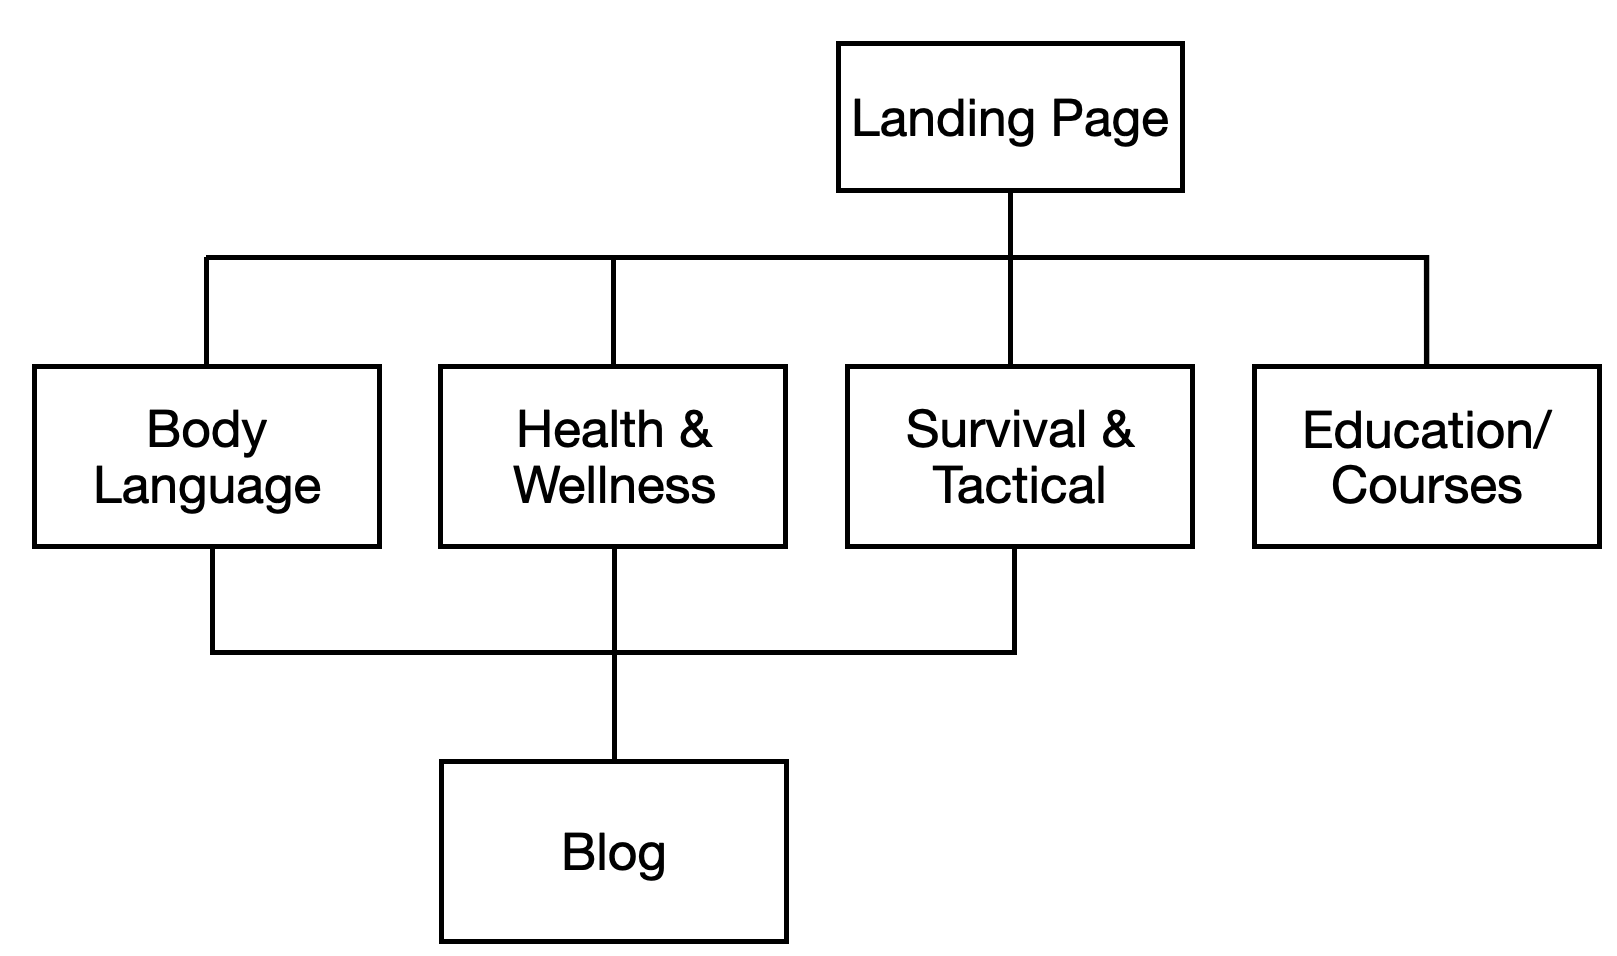 Revised Sitemap